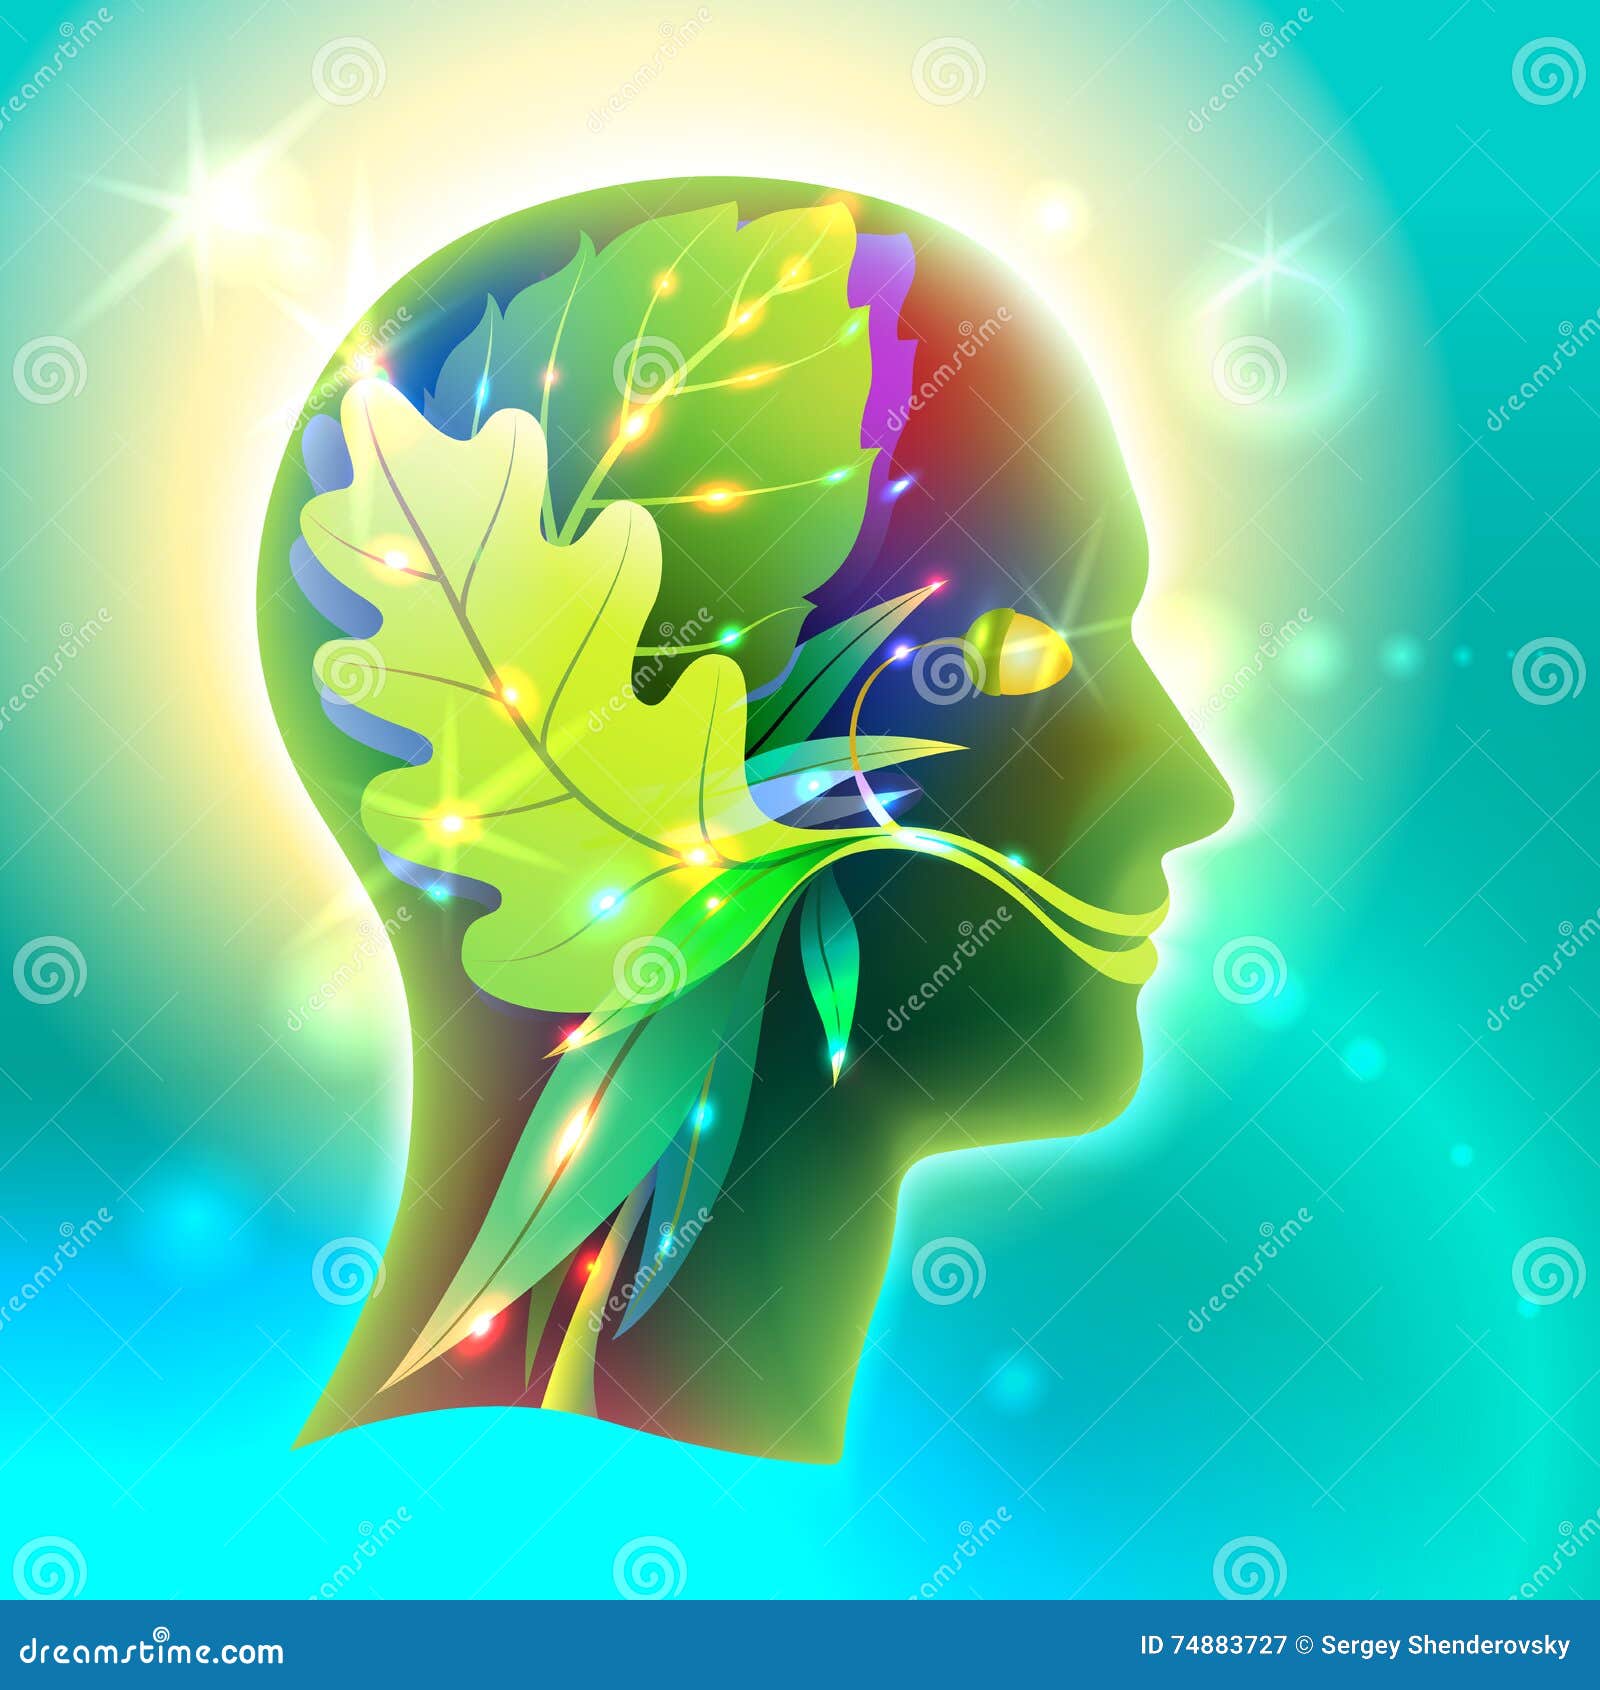 Profile of the Head of Man Nature Stock Vector - of design, 74883727